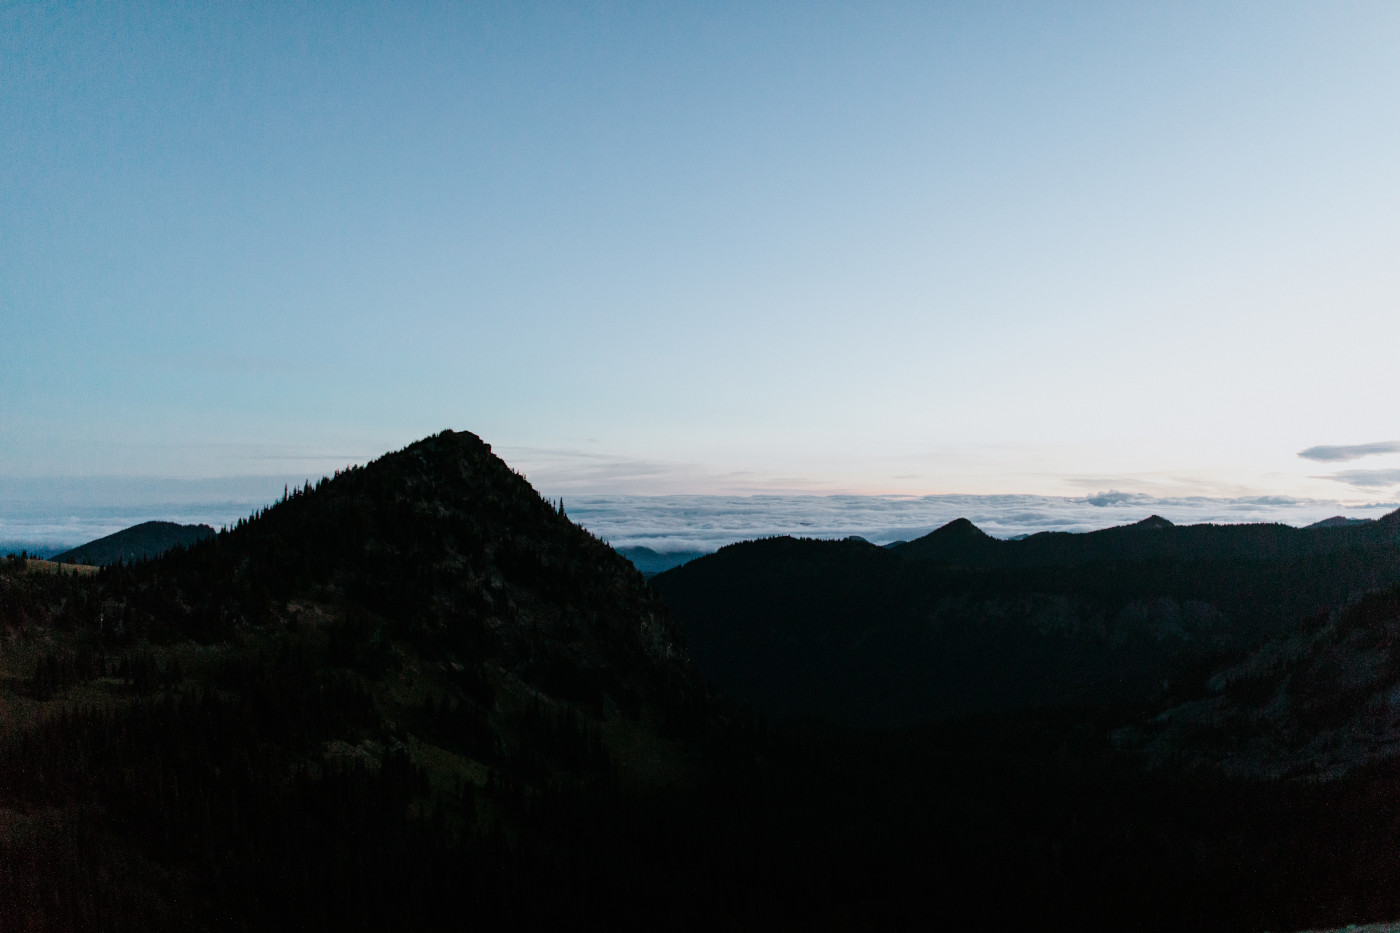 A view of the sunrise over the mountains. Elopement photography at Mount Rainier by Sienna Plus Josh.